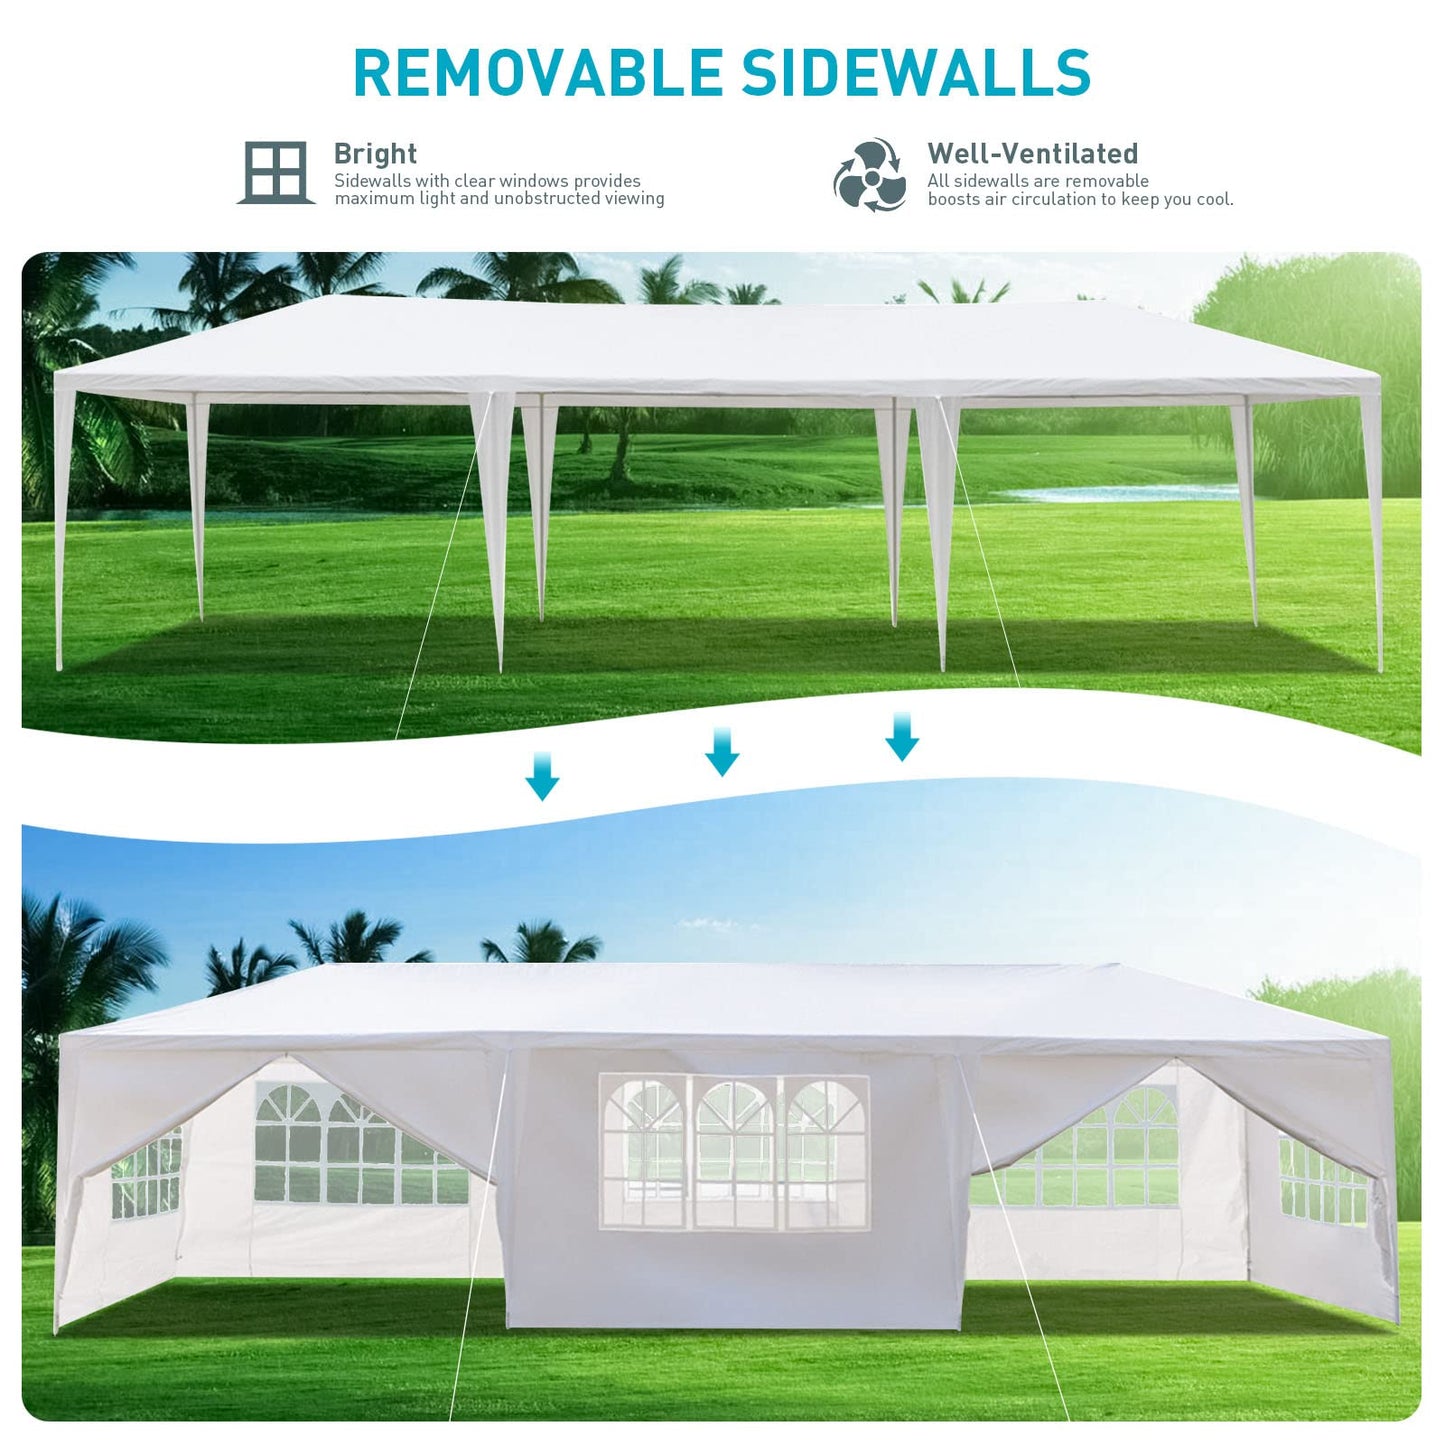 10x30 Party Tent, Outdoor White Tents for Parties, Wedding, Birthday, Large Canopy Tent with 8 Removable Sidewalls (2 Zipper Door), Outside Big Event Tent for Backyard, Garden